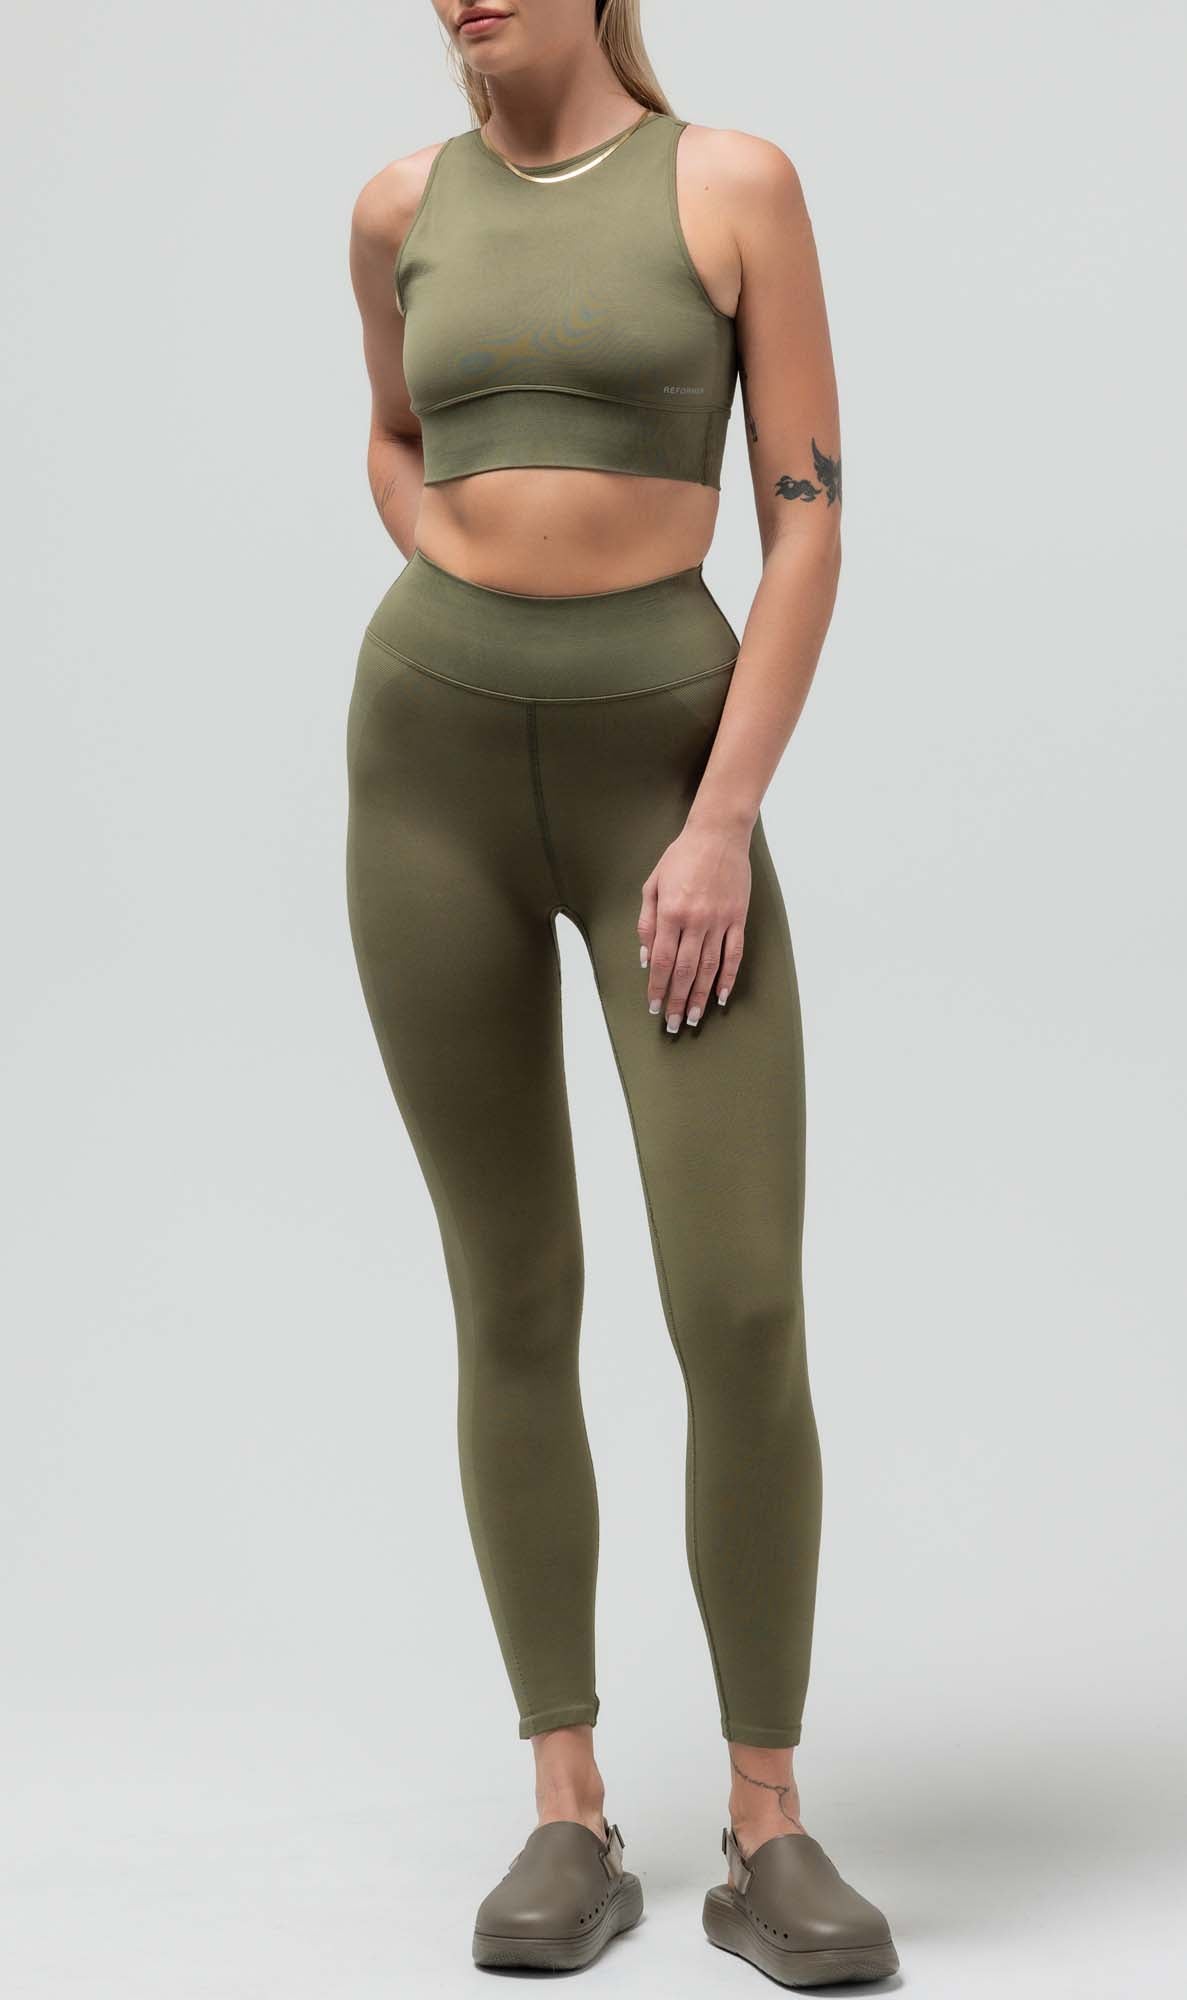 THE UPSIDE Compression Athletic Leggings for Women